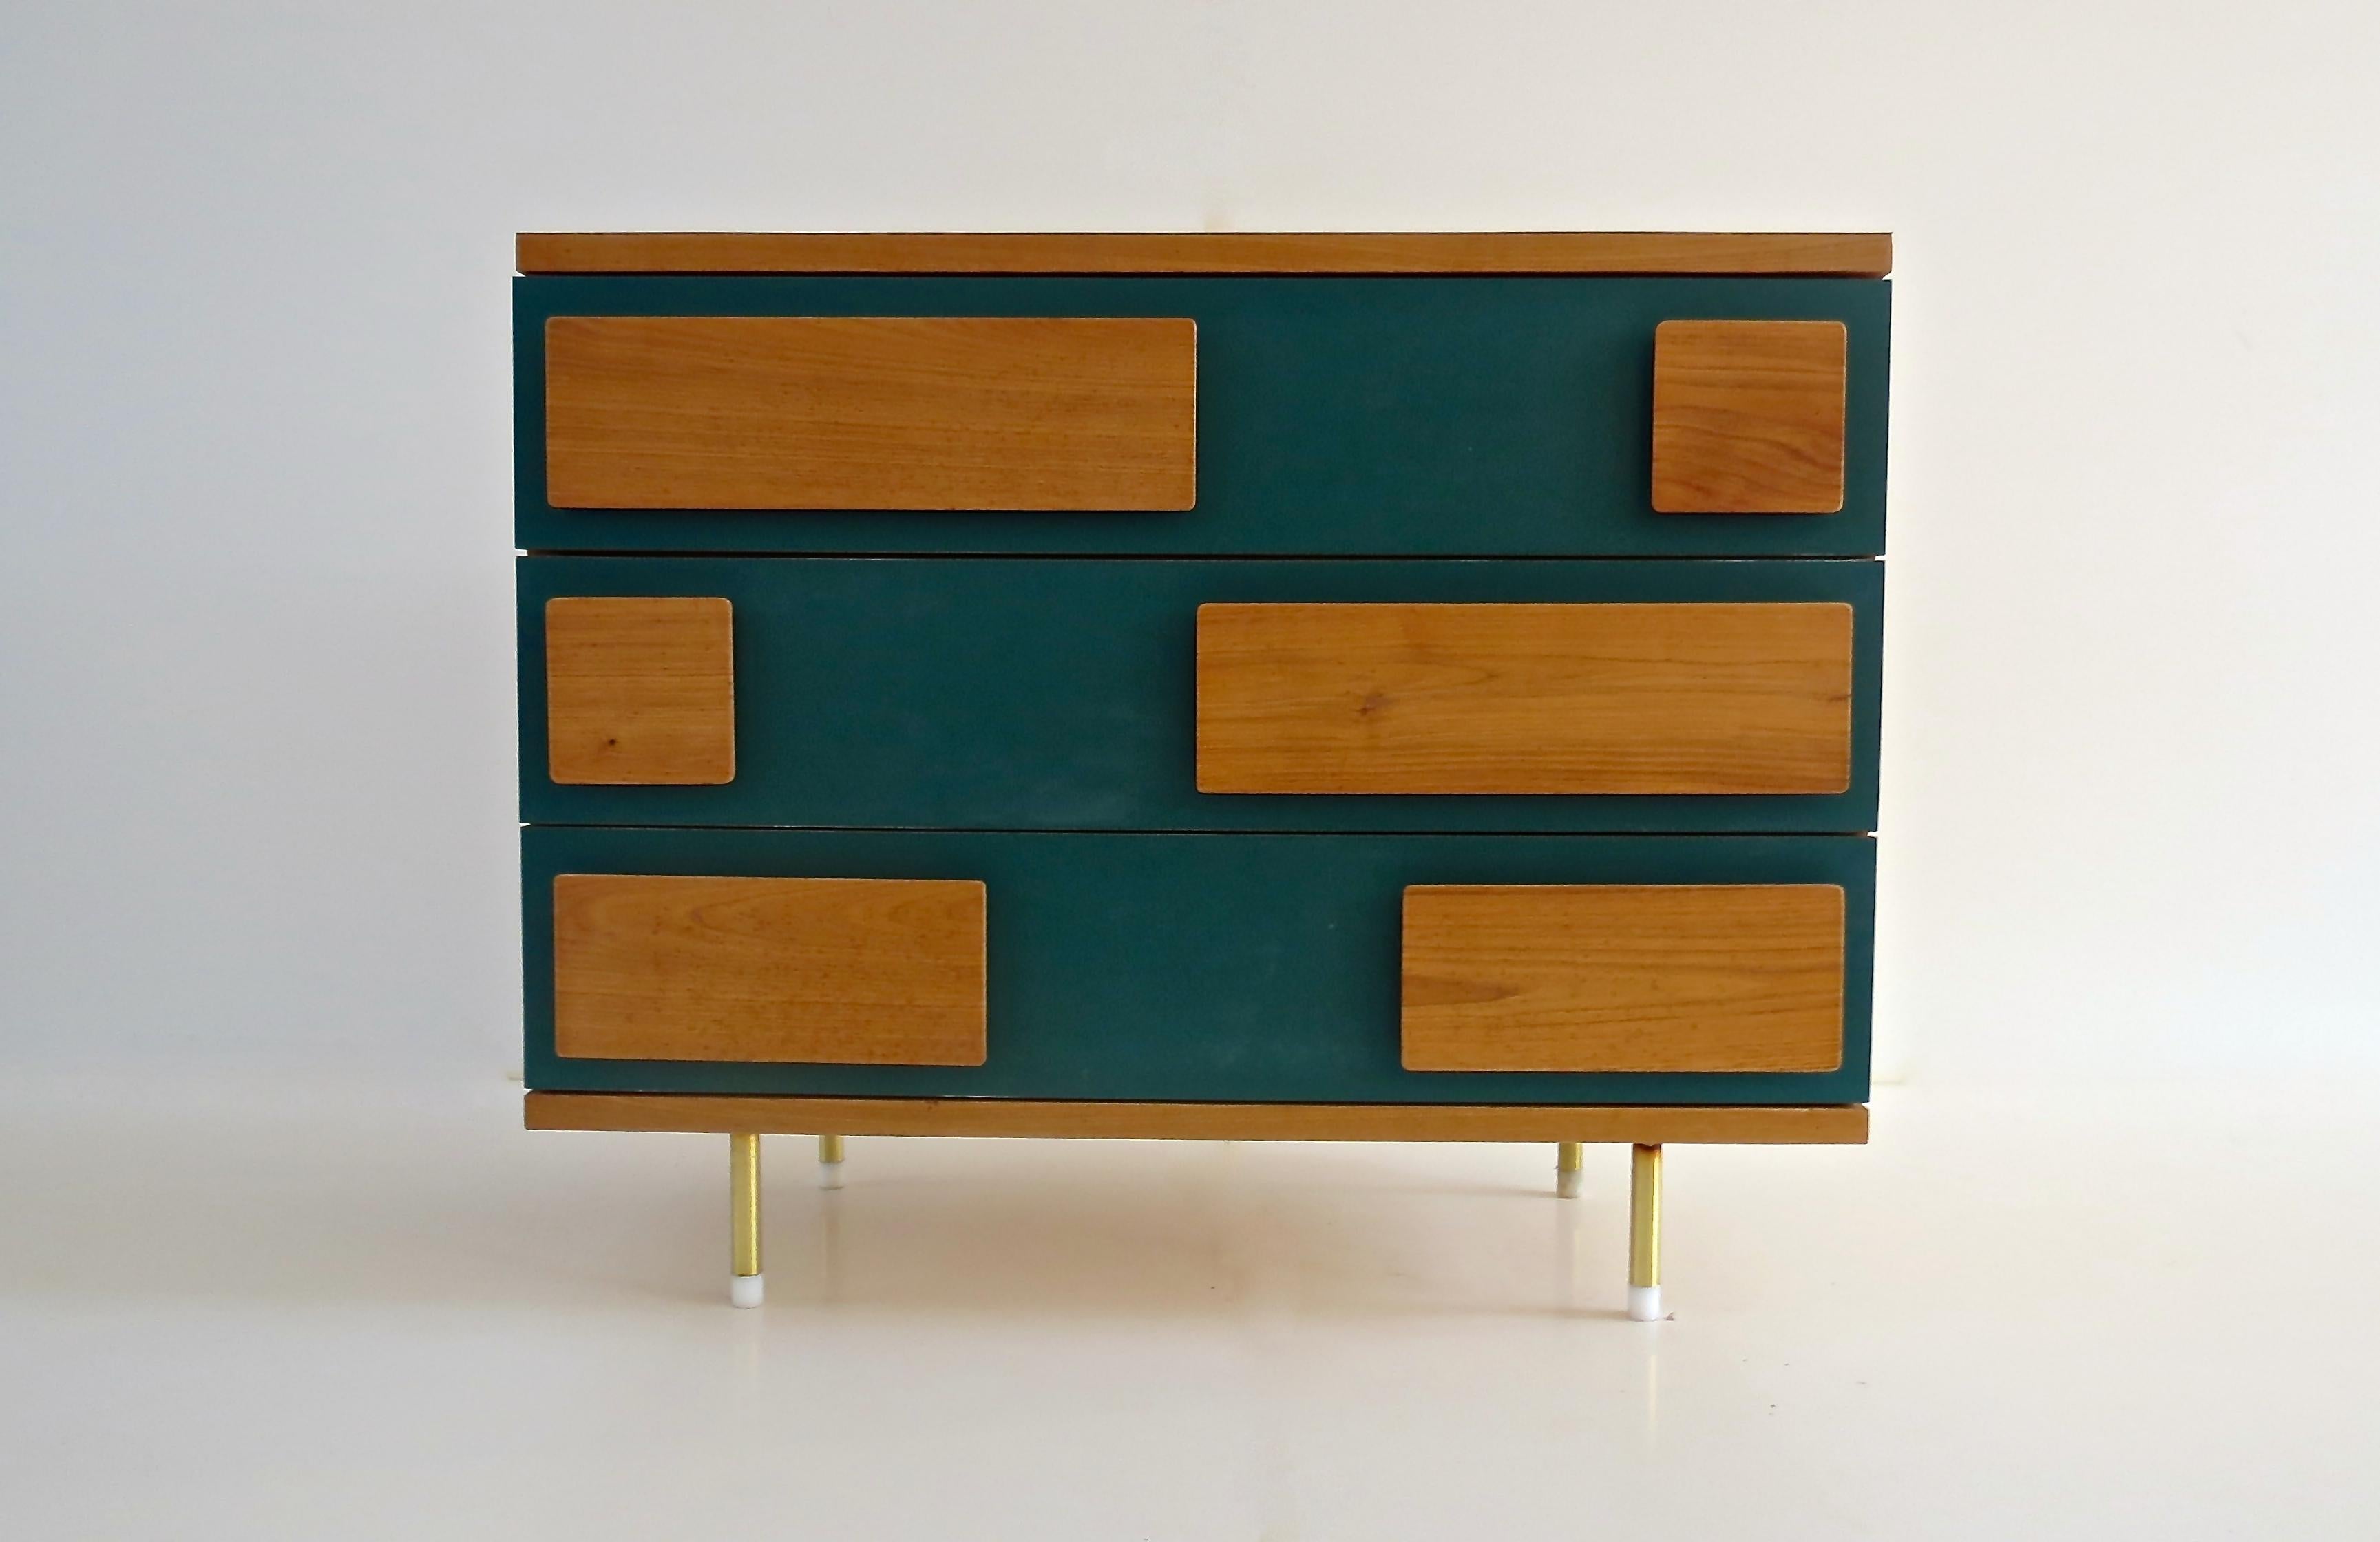 Important cabinet by Gio Ponti produced for Hotel Parco dei Principi in Rome, 1964
Chest of drawers produced by Giordano Chiesa
Three drawers
chestnut wood formica brass plastic
inscribed to reverse in blue crayon 23 ( room?)
Provenance: Hotel